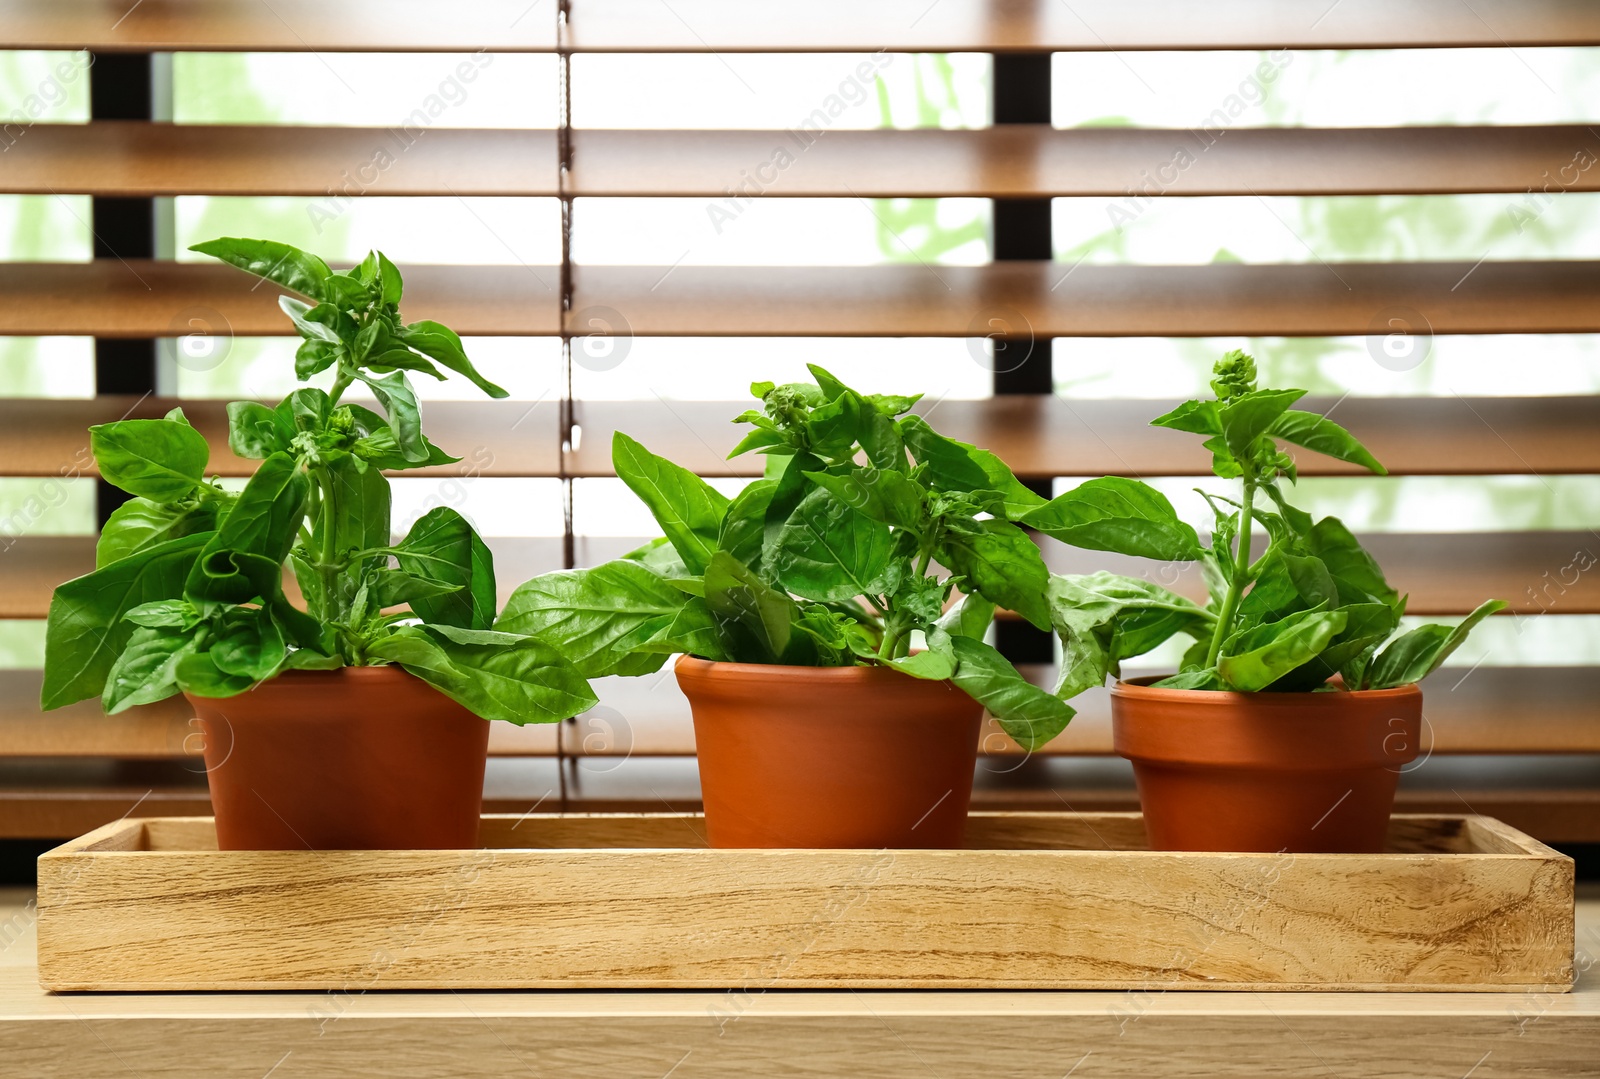 Photo of Green basil plants in pots on window sill indoors